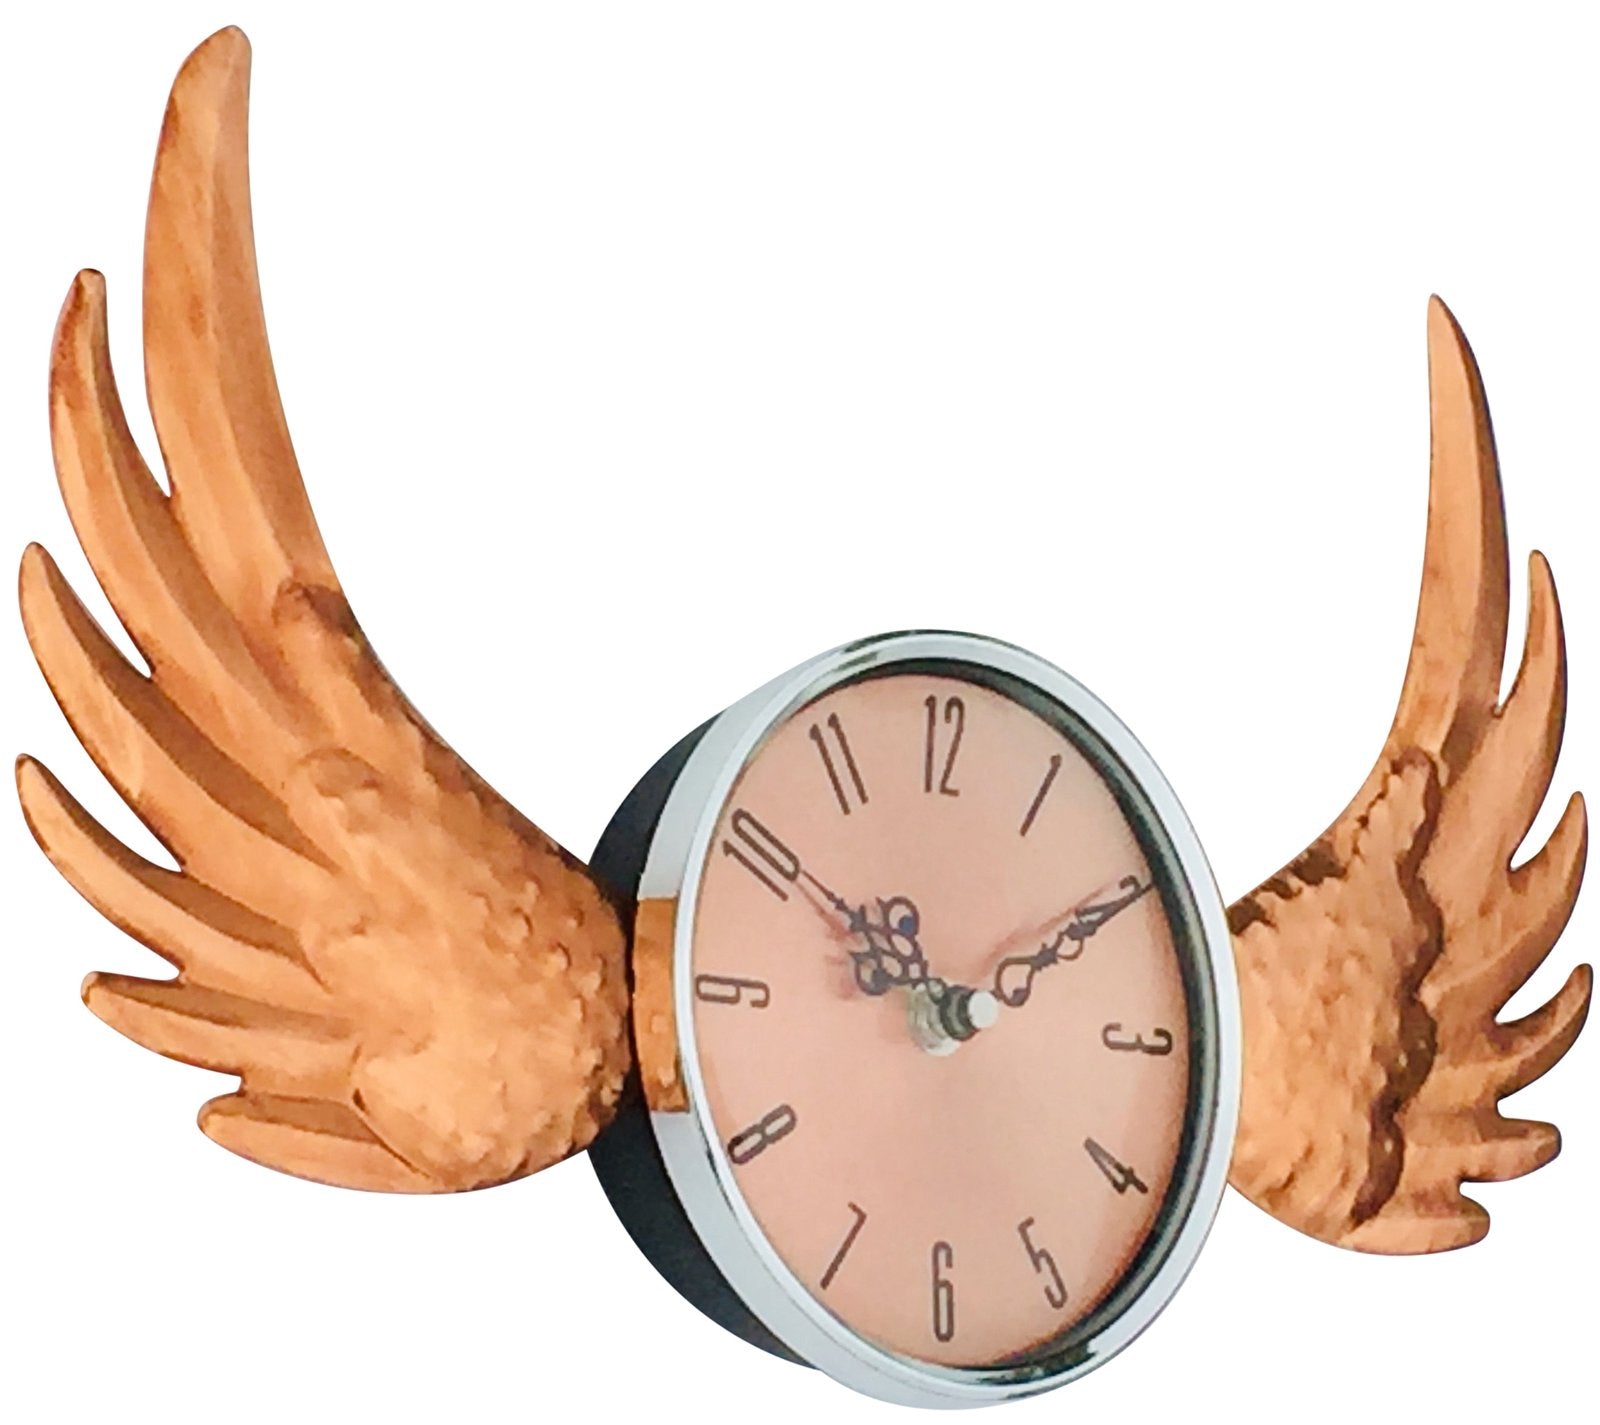 Copper Winged Wall Clock with Glass Cover 39cm